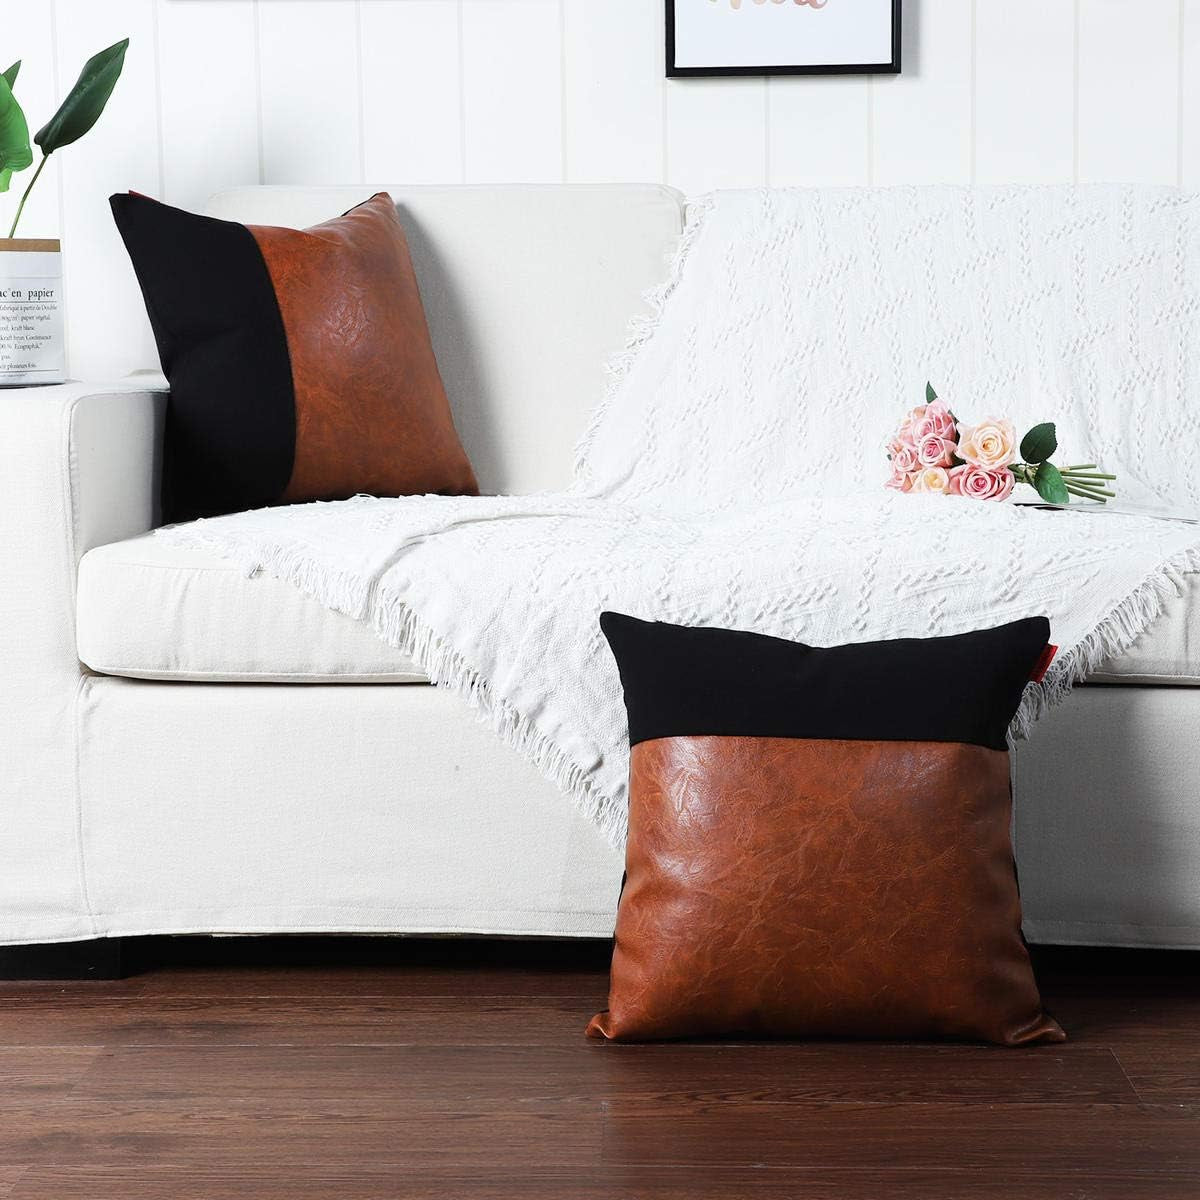 Set of 2 Luxury Boho Decorative Throw Pillow Covers Cushion Cases Faux Leather and Cotton Farmhouse Pillowcases for Couch Sofa Bed 16X16 Inches Brown Black